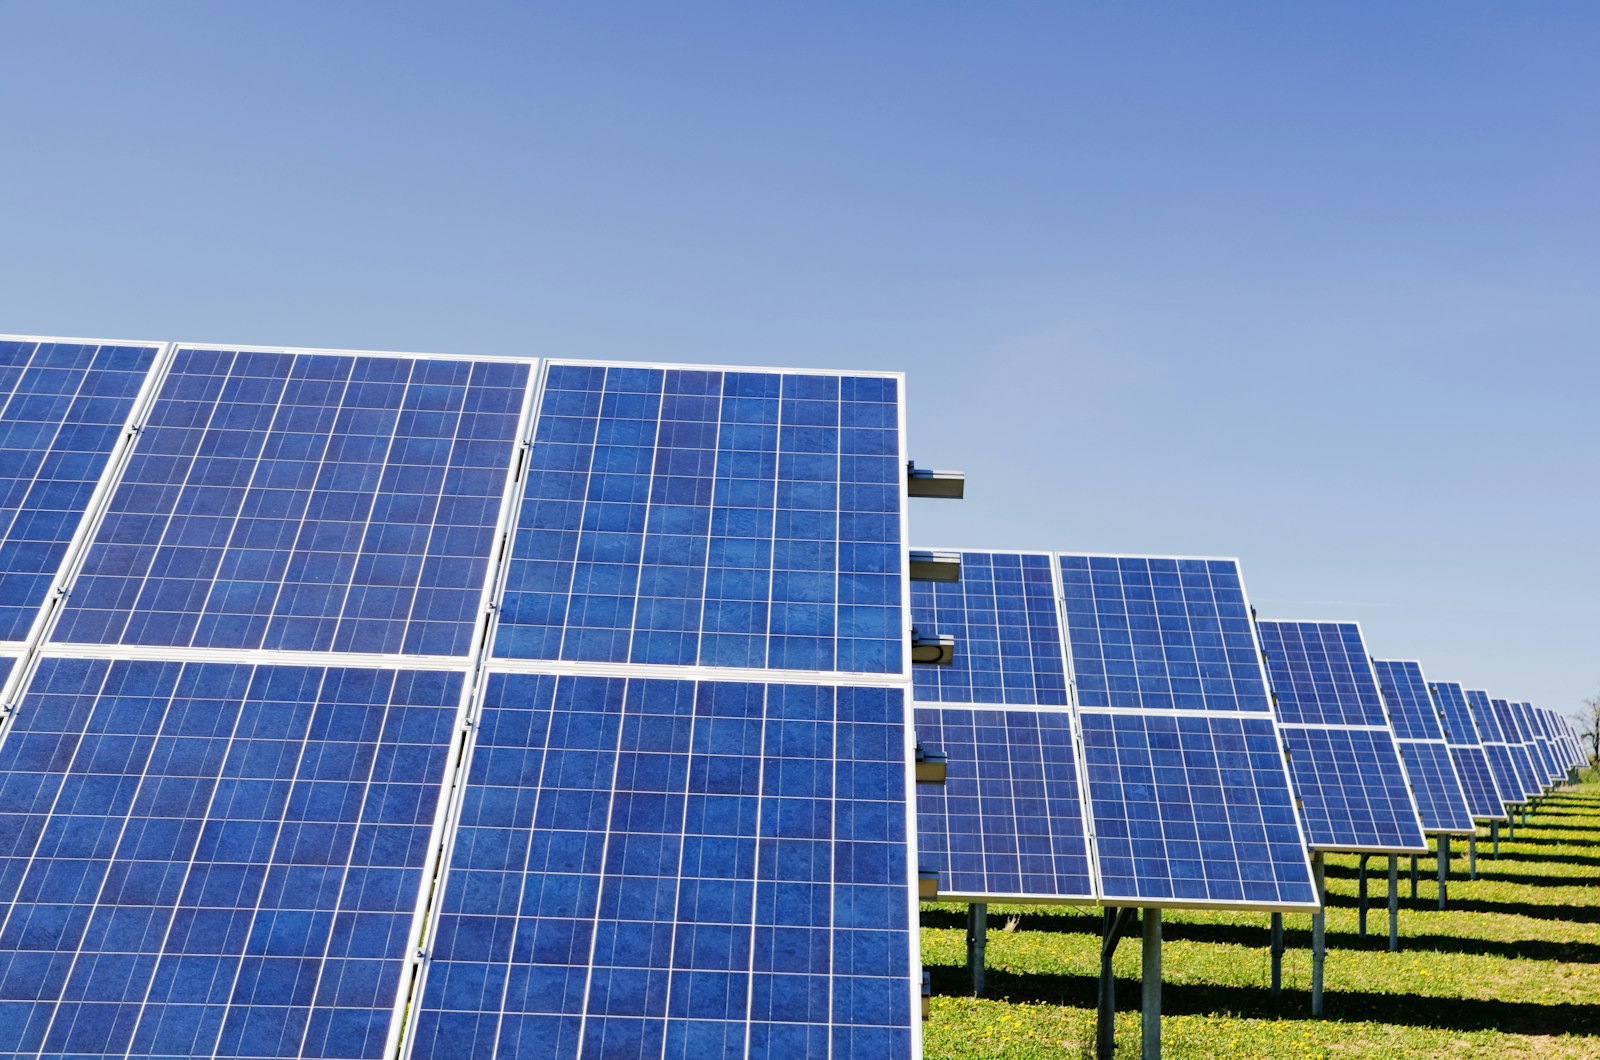 Solar Supply Chain Bill Aims to Upgrade U.S. Manufacturing Facilities